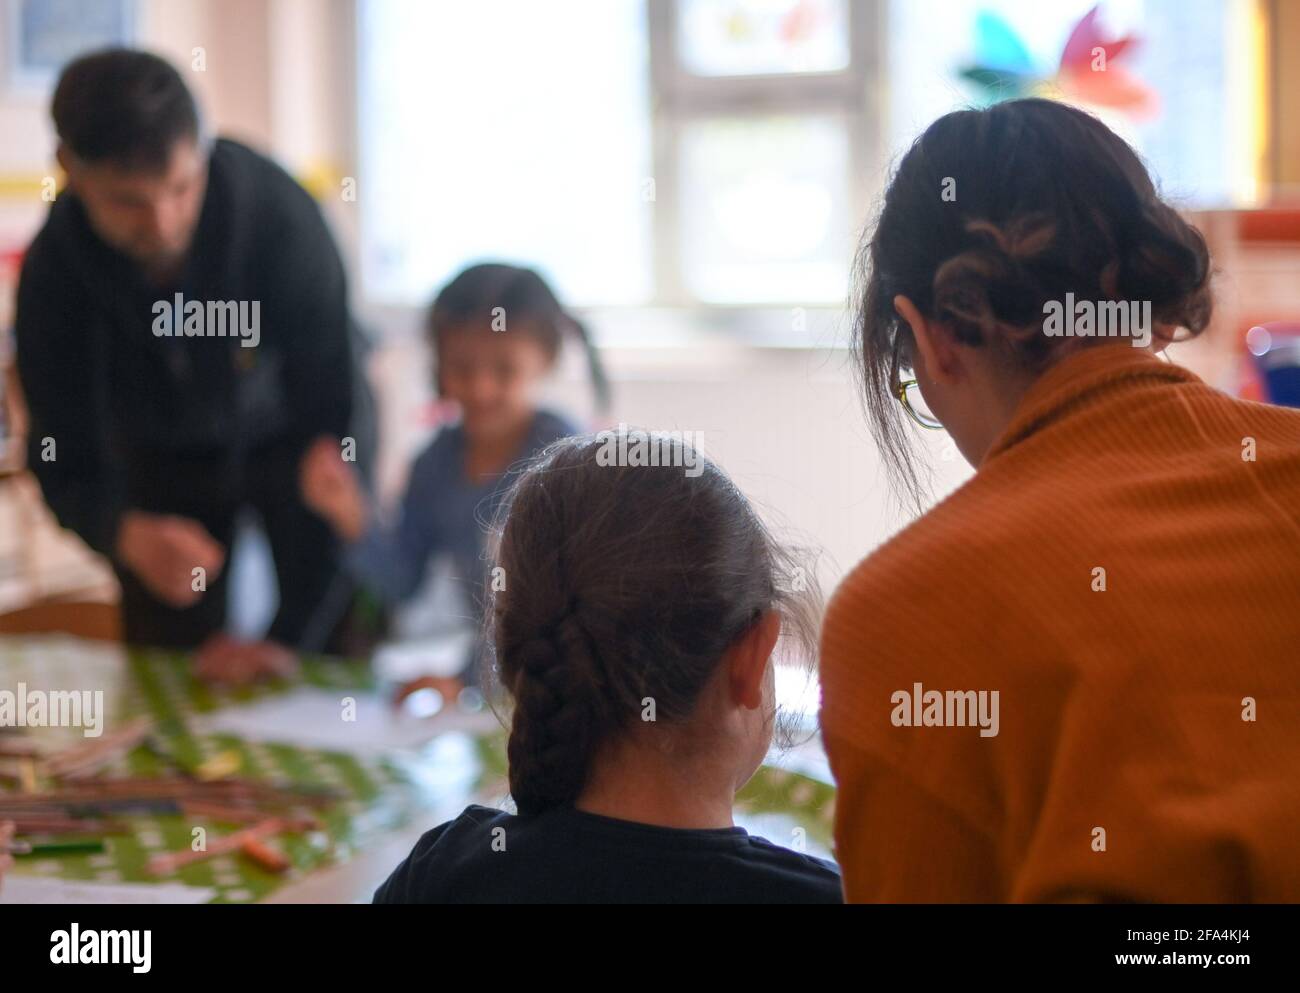 Berlin, Germany. 21st Apr, 2021. Children are looked after during leisure time care at the Arche in Hellersdorf. The association 'Die Arche Christliches Kinder- und Jugendwerk' runs leisure facilities and school care for socially disadvantaged children. Credit: Jens Kalaene/dpa-Zentralbild/dpa/Alamy Live News Stock Photo